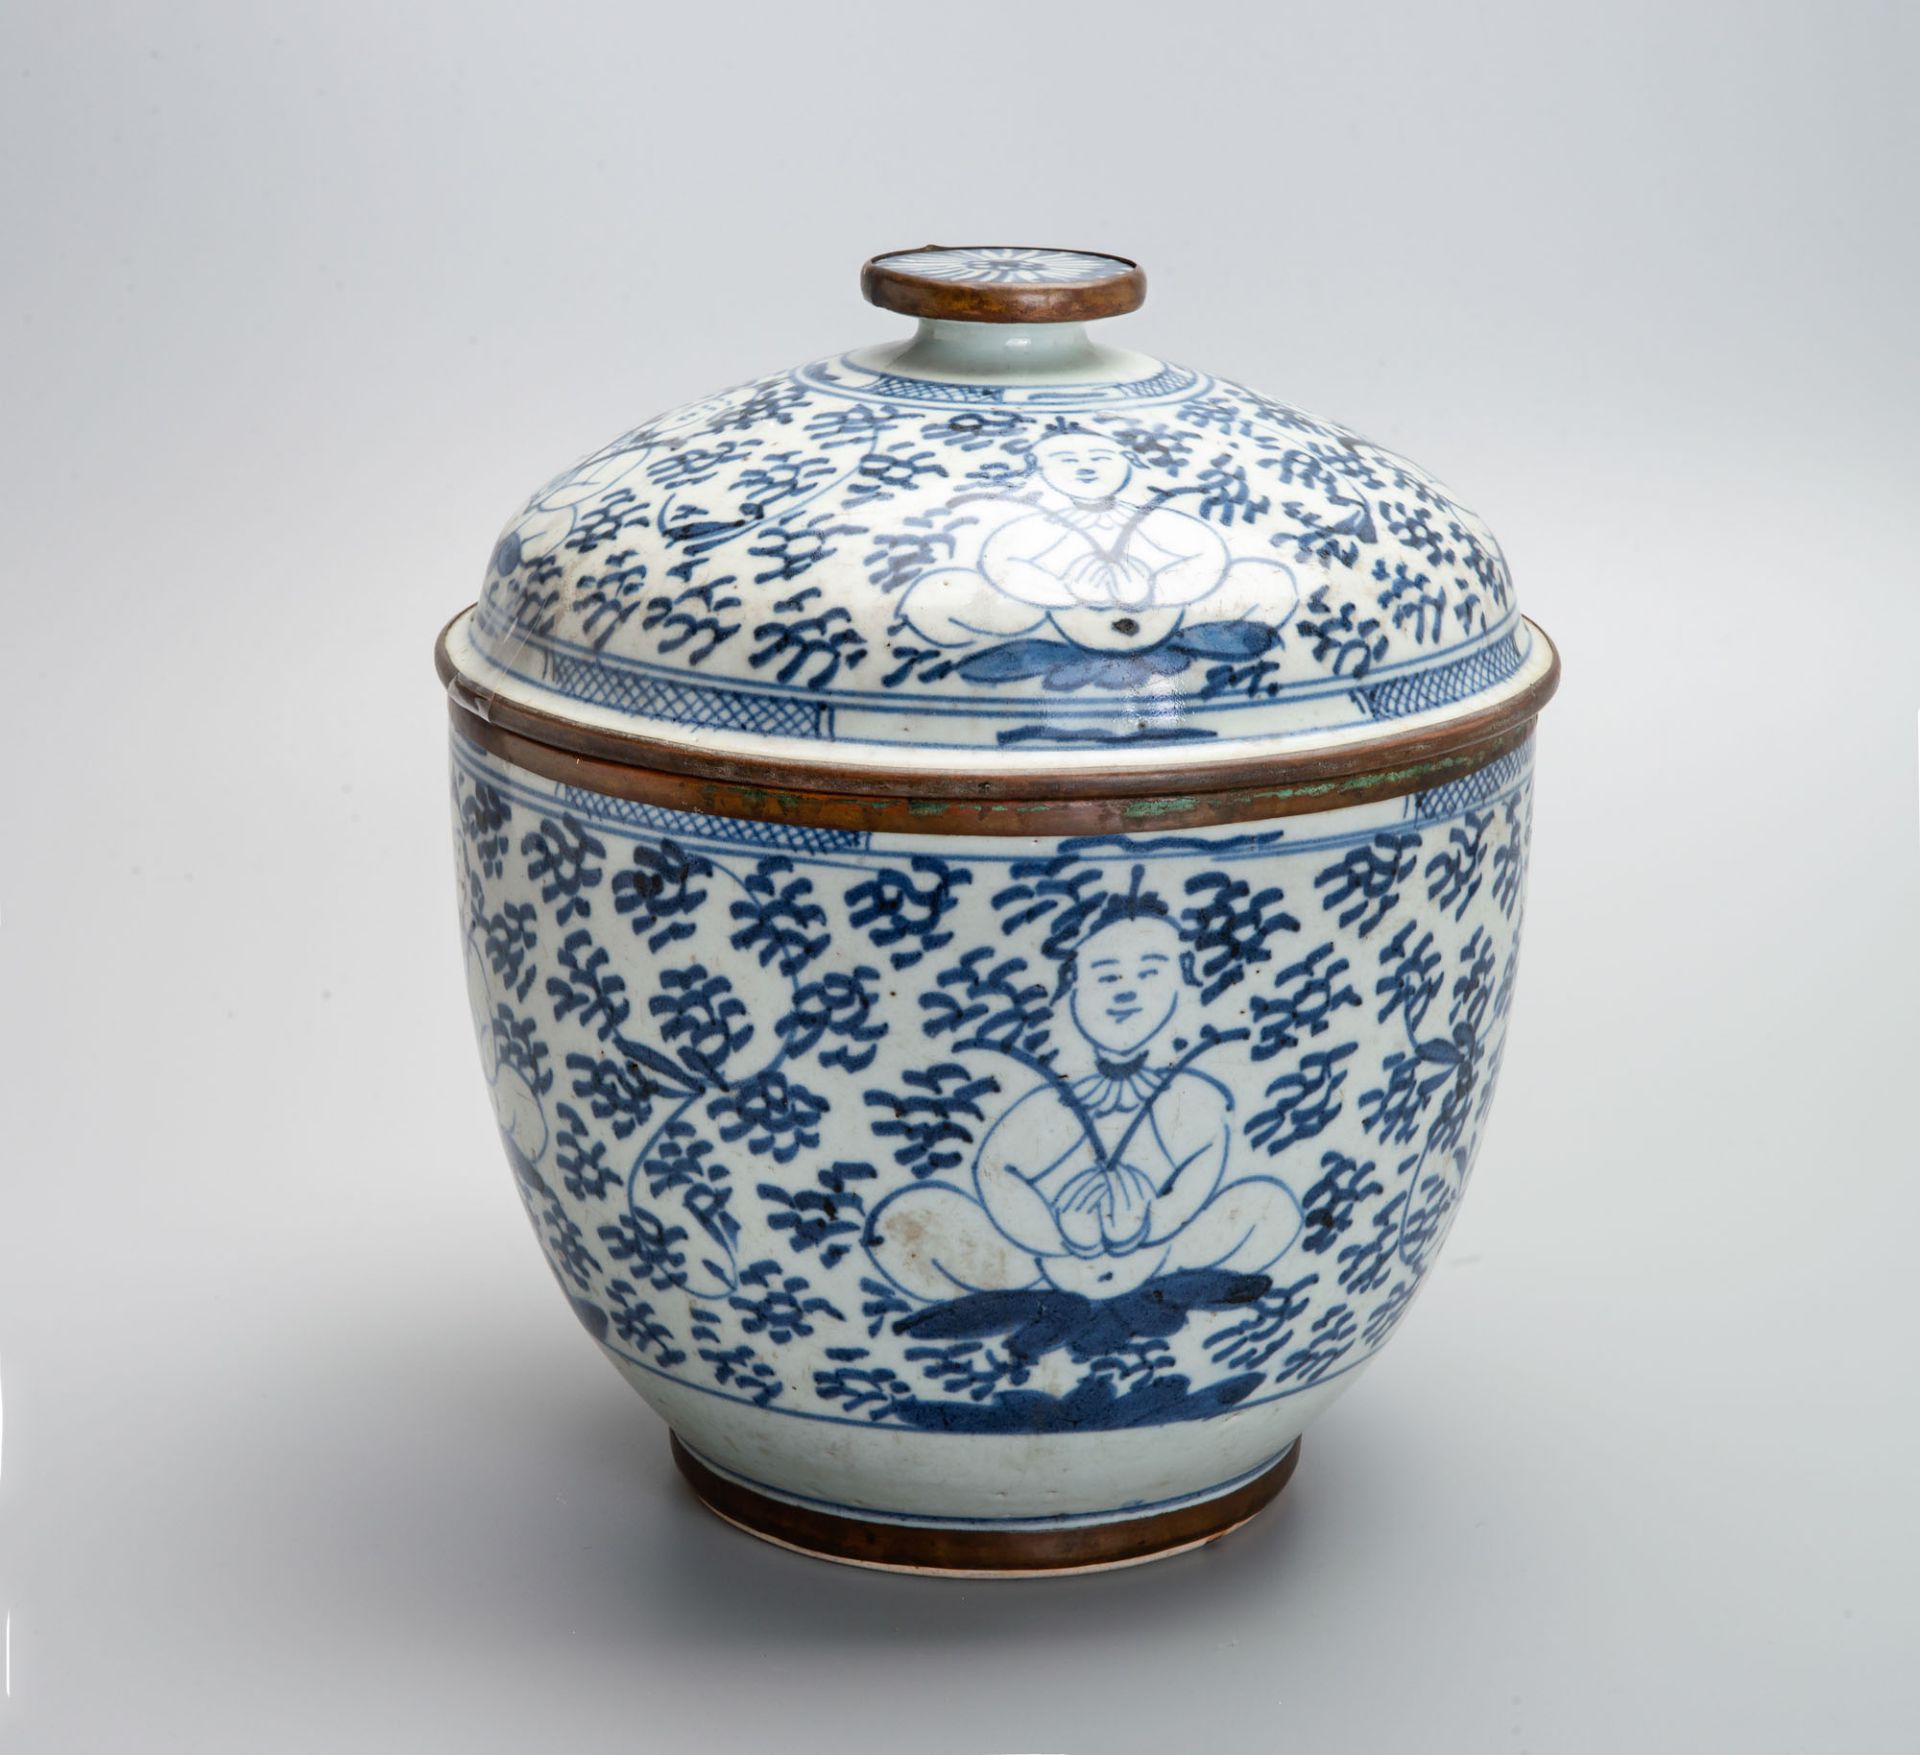 A Rare Blue and White Porcelain Lidded Jar, China, Qing Dynasty, 18th century